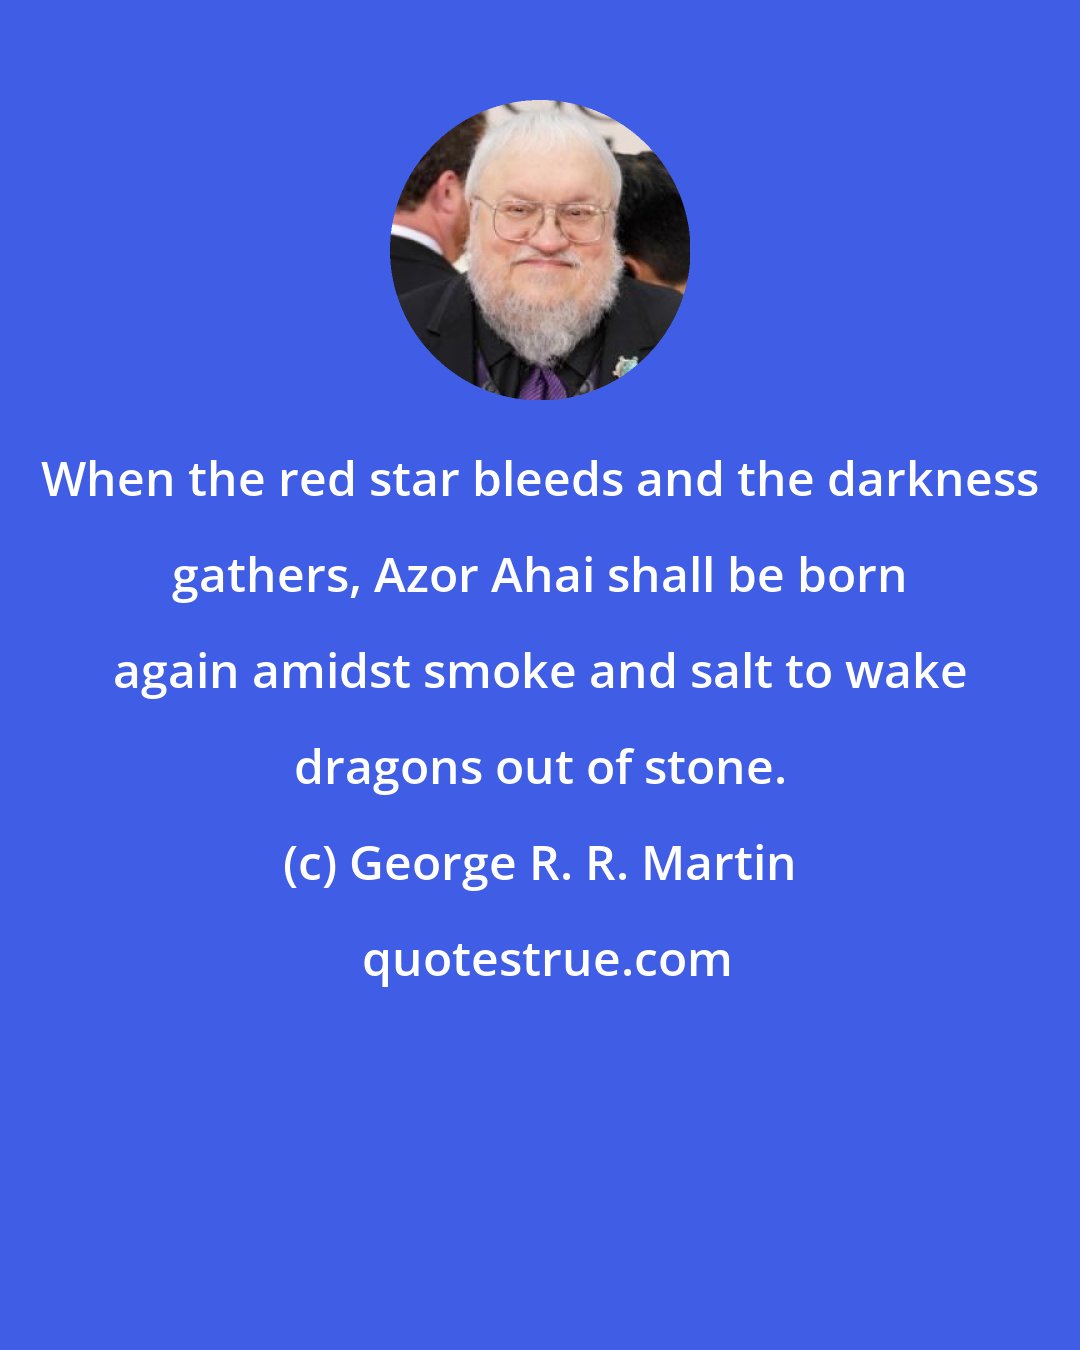 George R. R. Martin: When the red star bleeds and the darkness gathers, Azor Ahai shall be born again amidst smoke and salt to wake dragons out of stone.